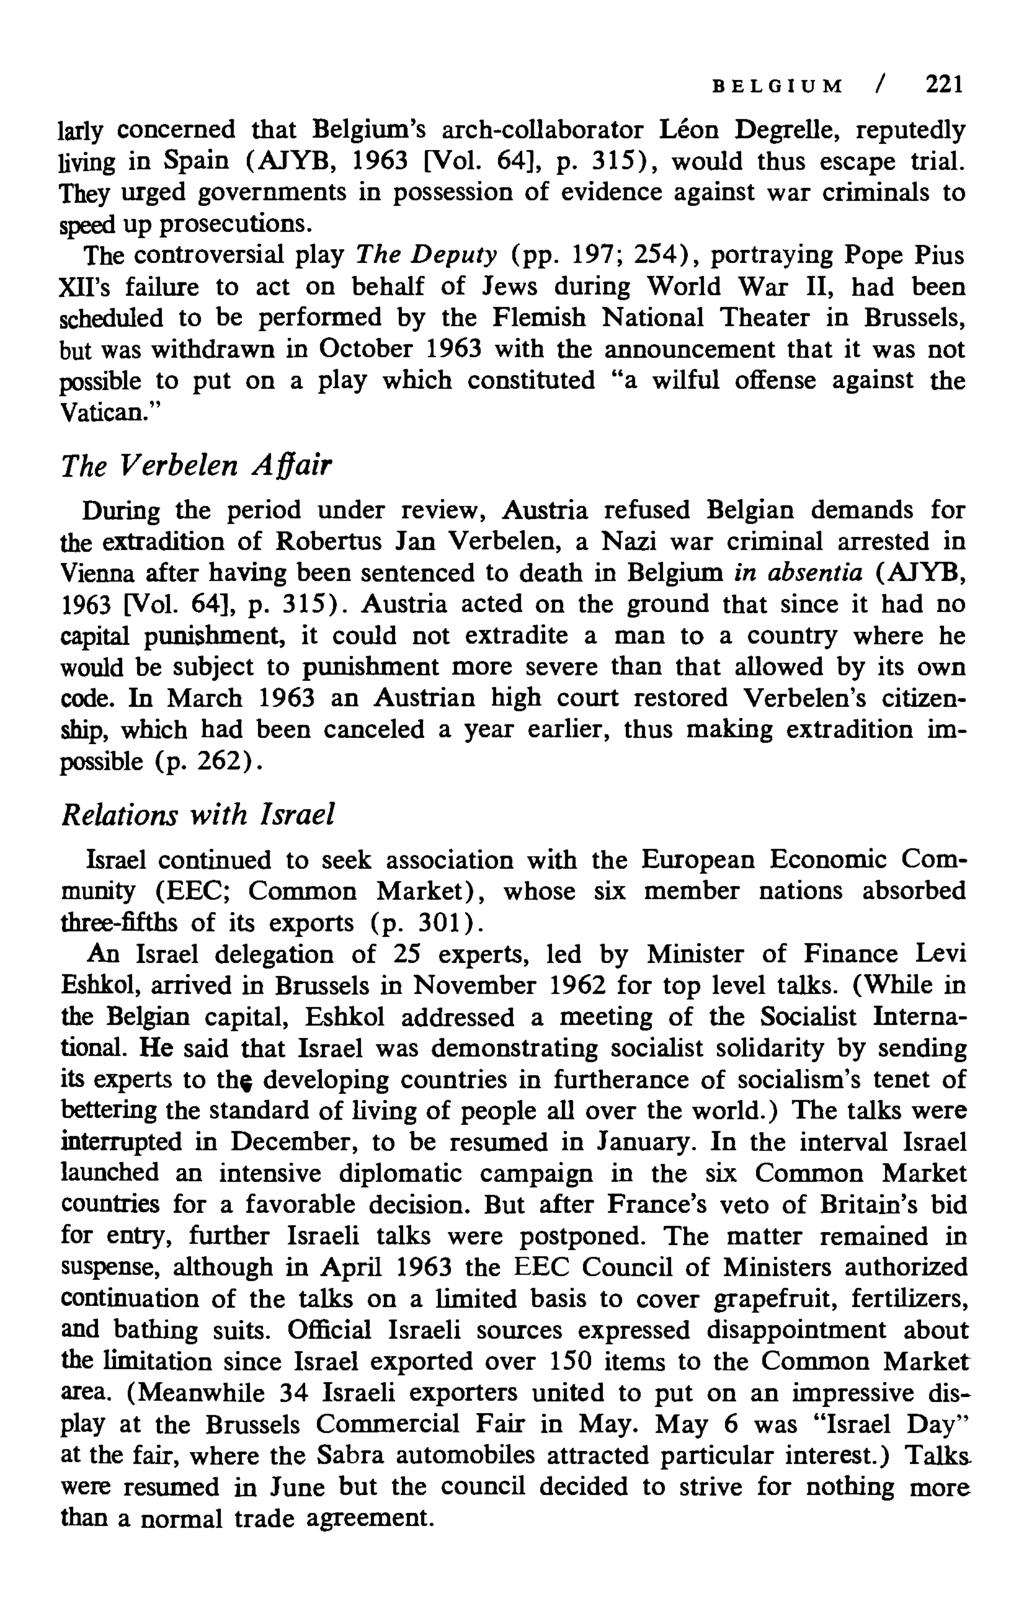 BELGIUM / 221 larly concerned that Belgium's arch-collaborator Leon Degrelle, reputedly living in Spain (AJYB, 1963 [Vol. 64], p. 315), would thus escape trial.